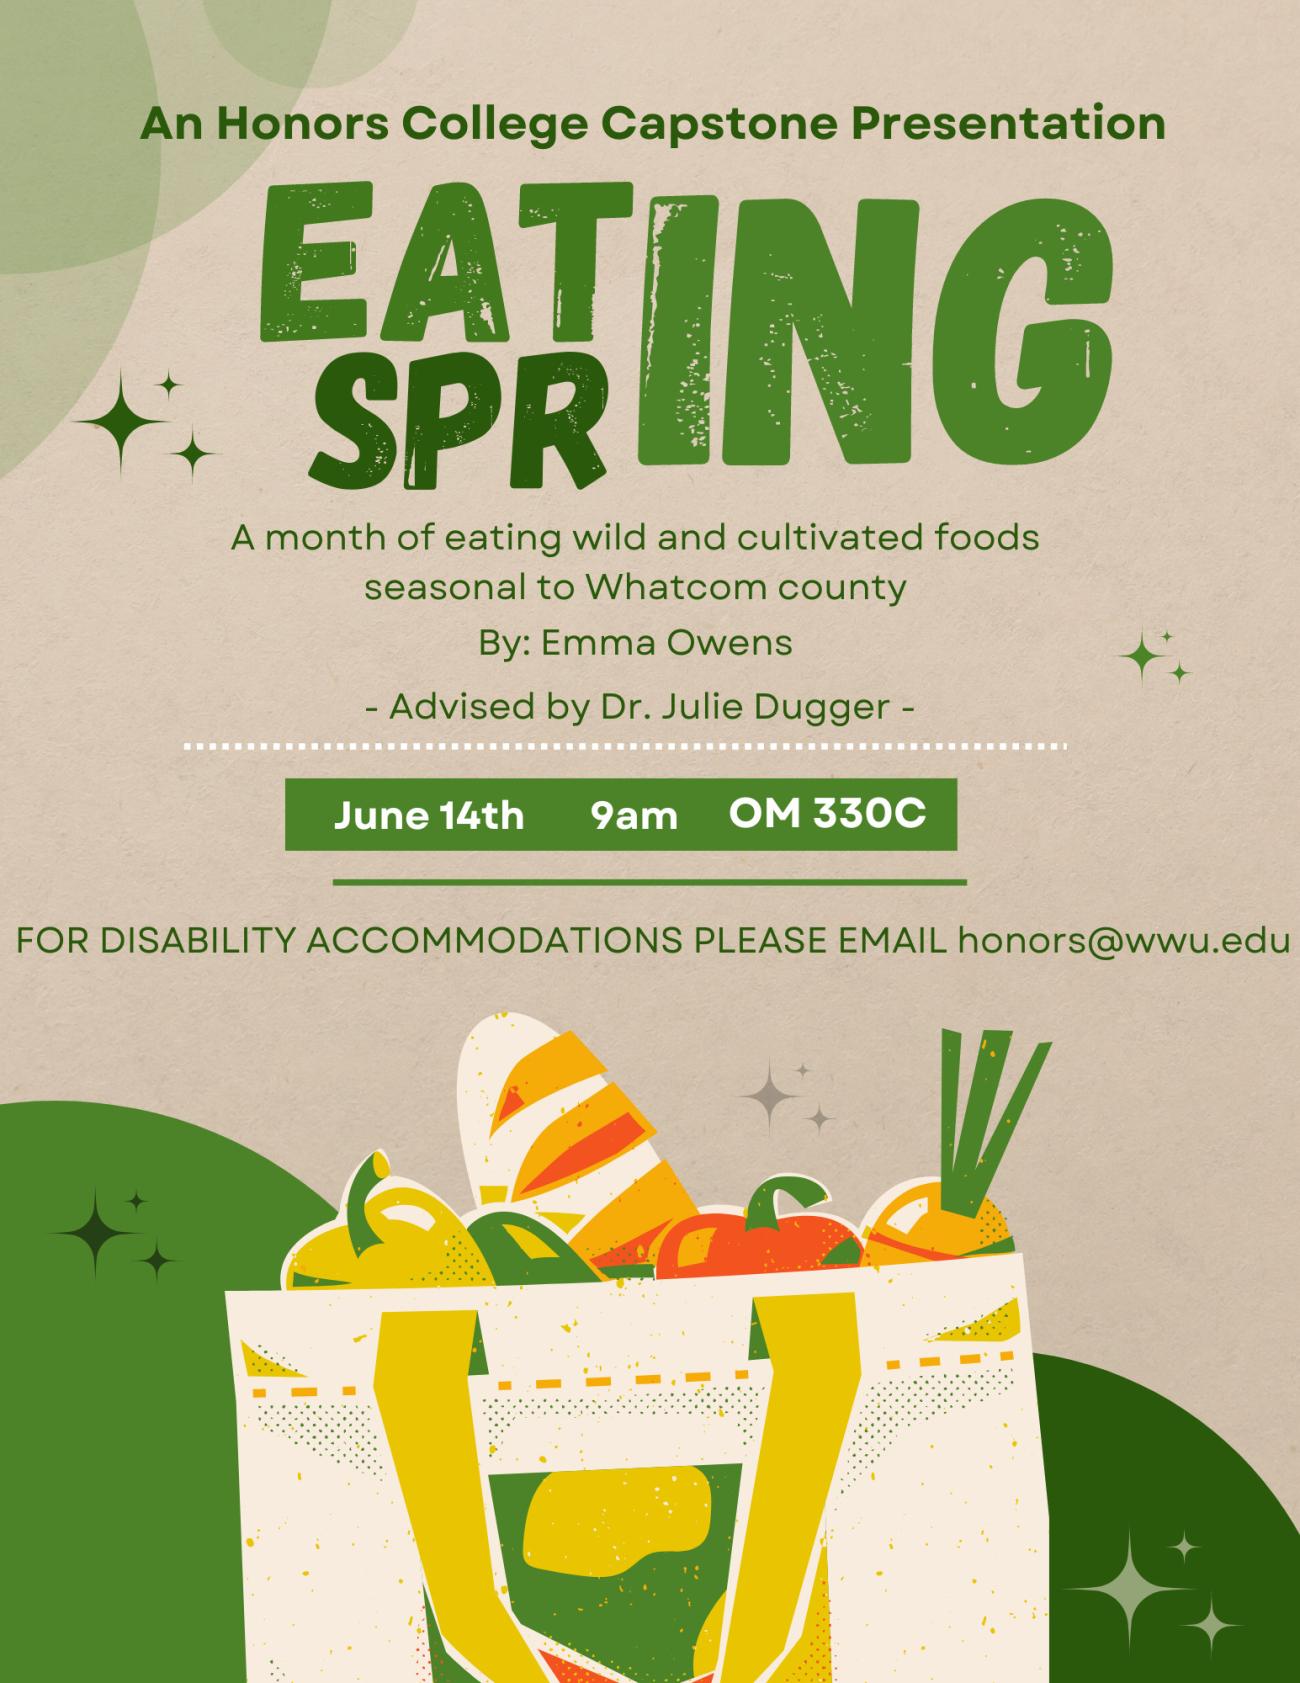 Poster for an honors capstone presentation titled "eating spring," focusing on seasonal foods in Whatcom county, scheduled for June 17th at 9 am, room OM 330C. Includes an illustration of a basket with vegetables.